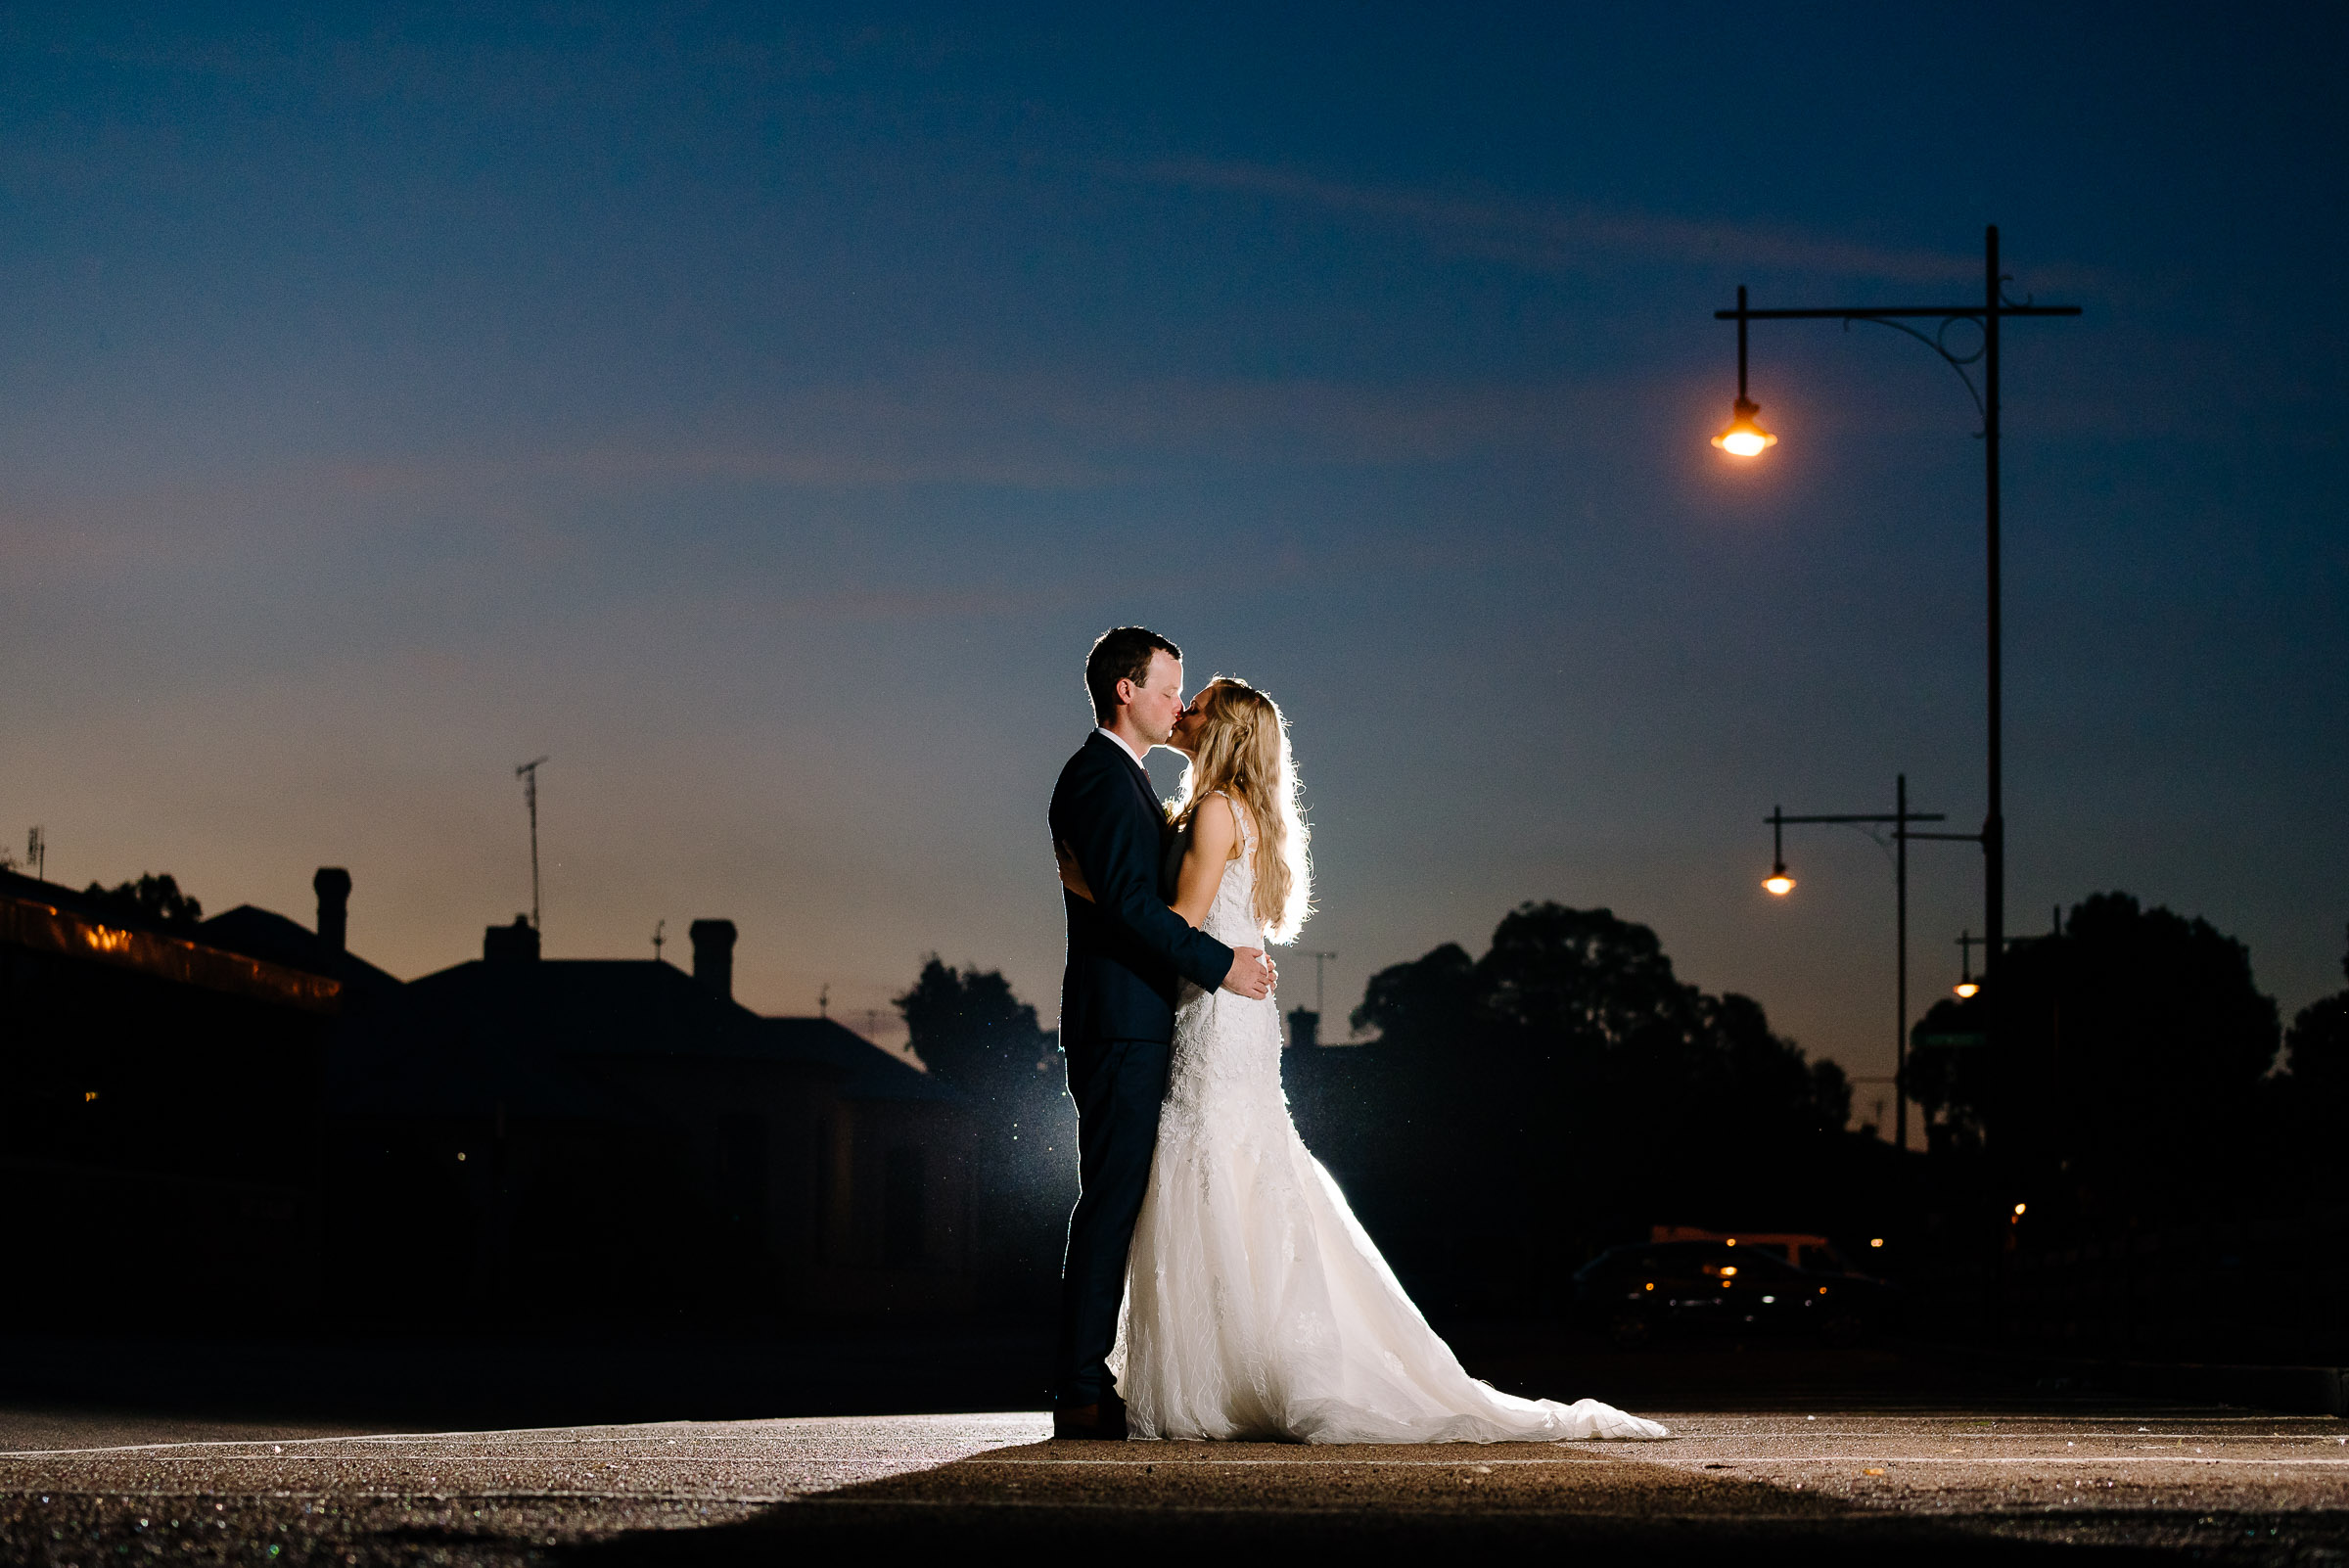 Sunset Twilight Bride and Groom at the Historic Port of Echuca - Radcliffes Wedding Photographer Echuca 